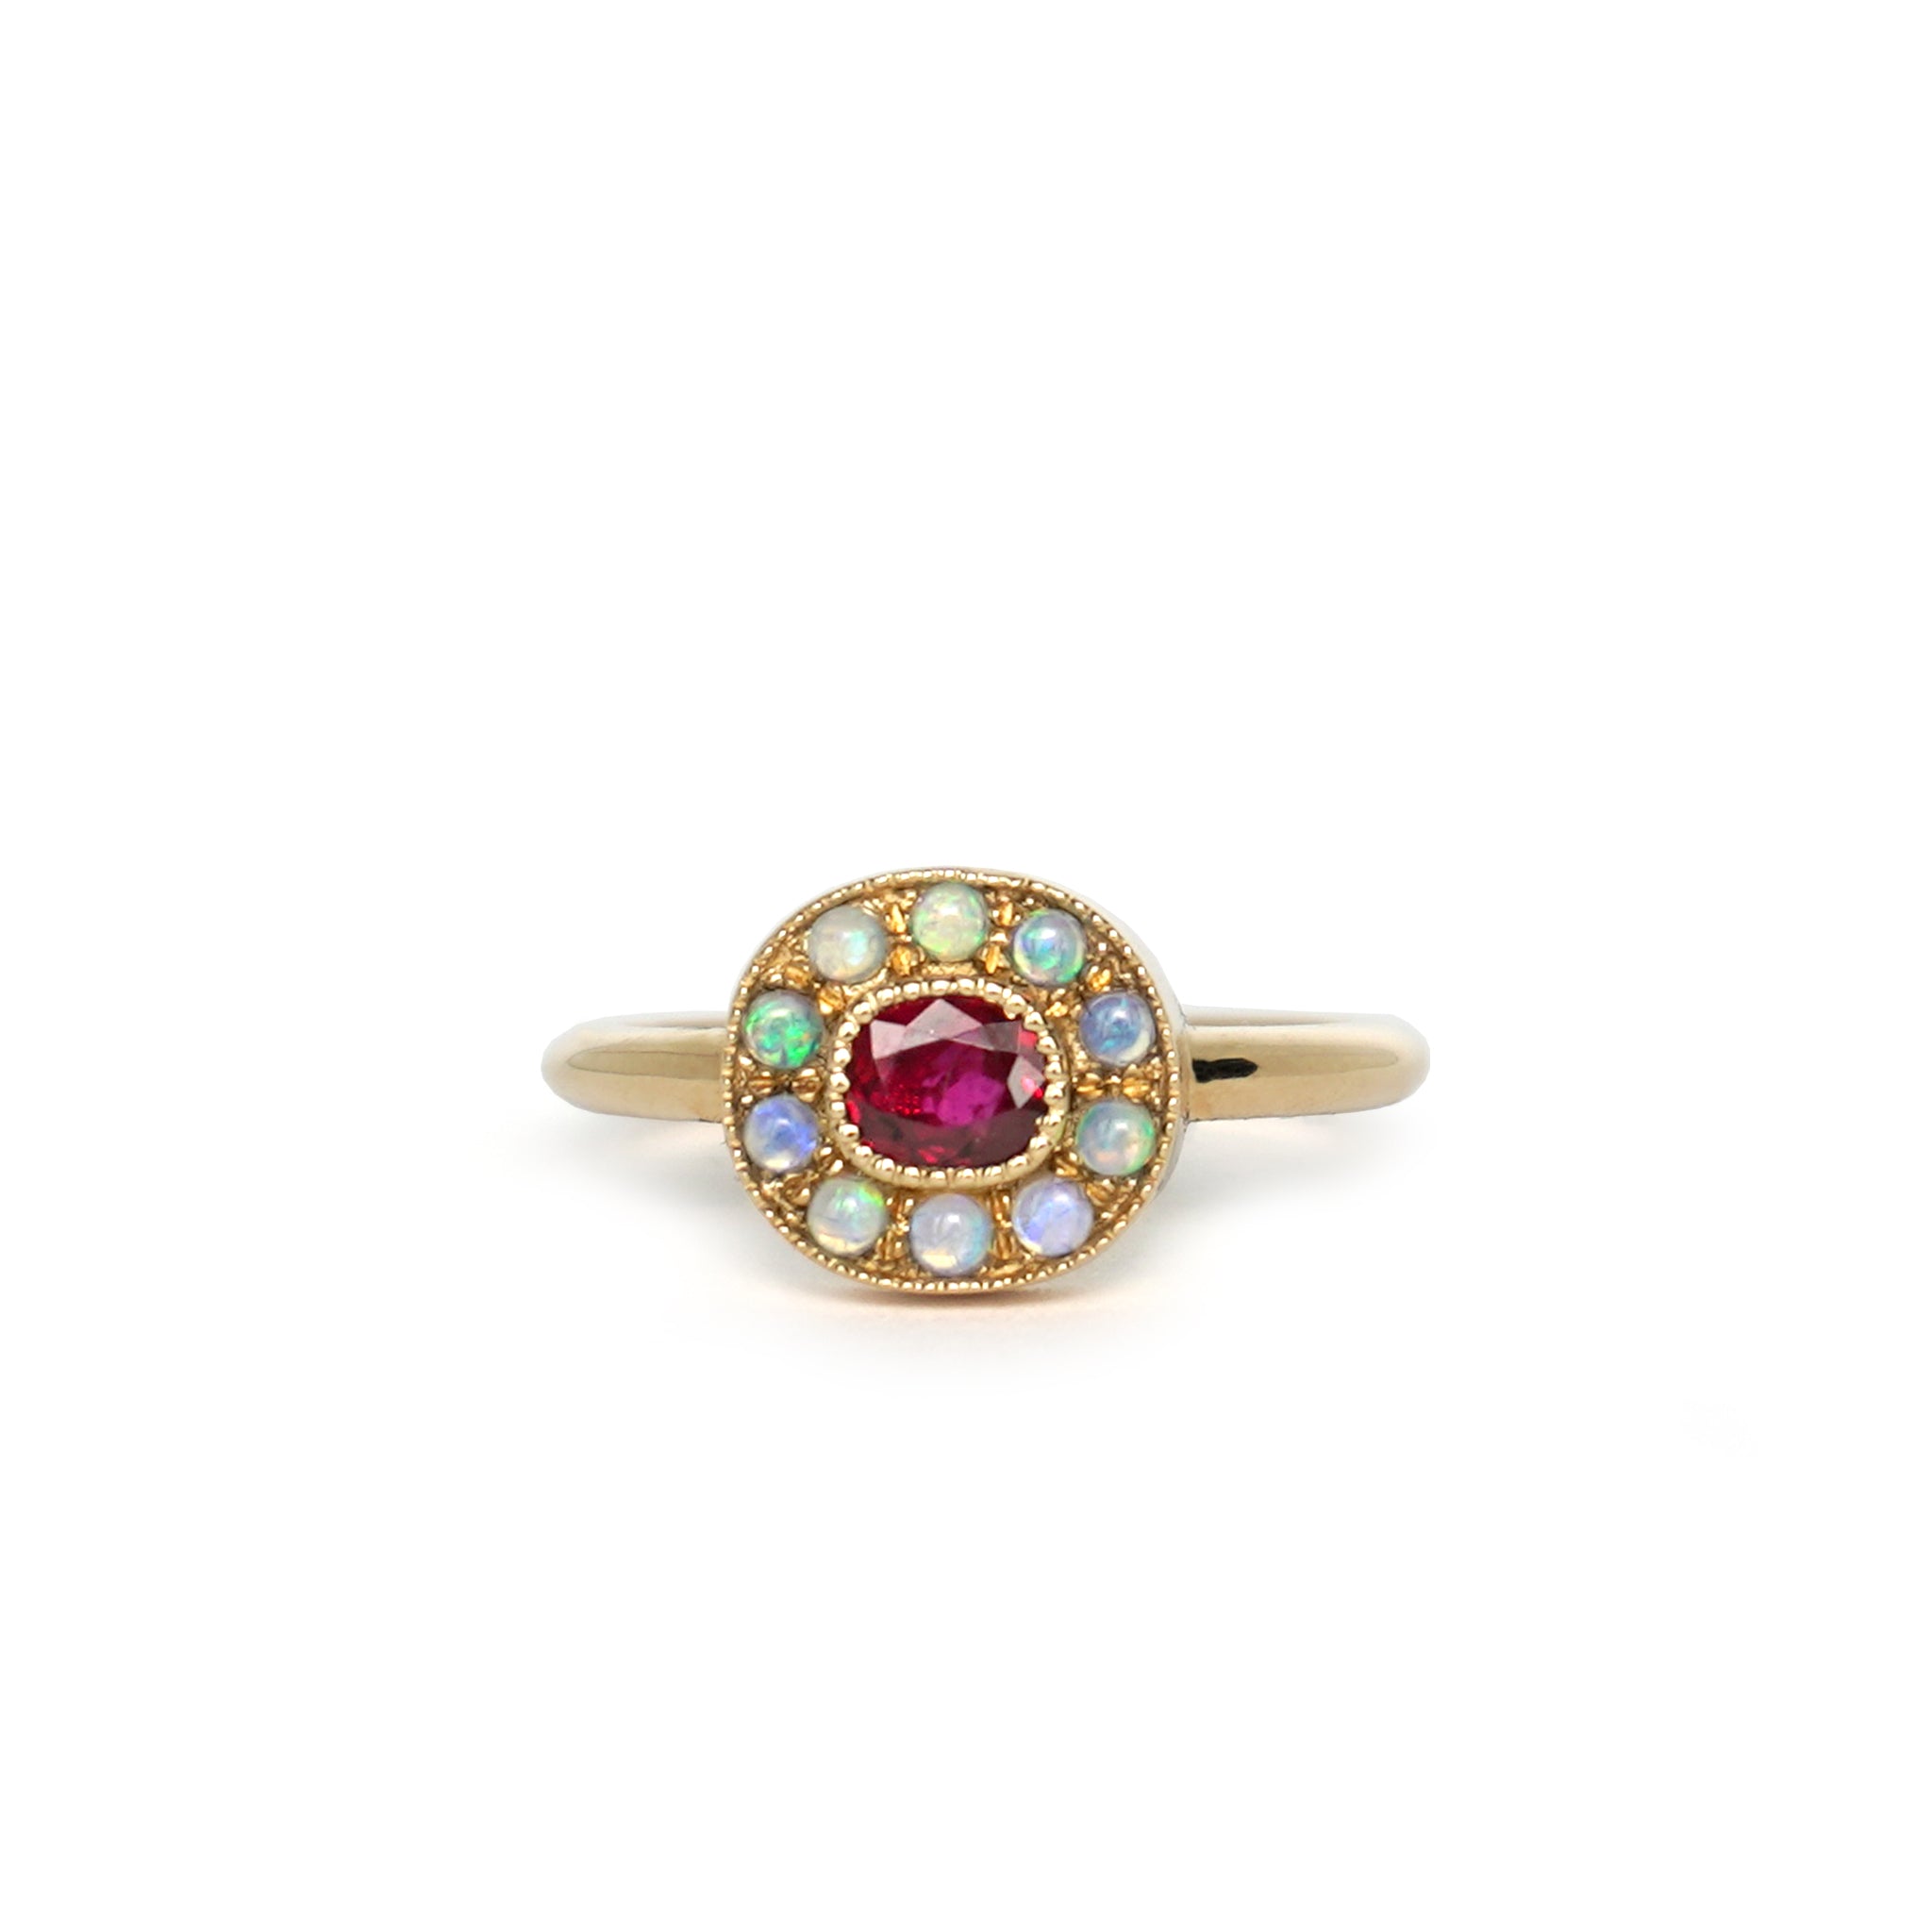 One-of-a-kind Ruby halo ring with mini Australian opals, retro-antique inspired design by Lico Jewelry, set in solid 14k yellow gold.